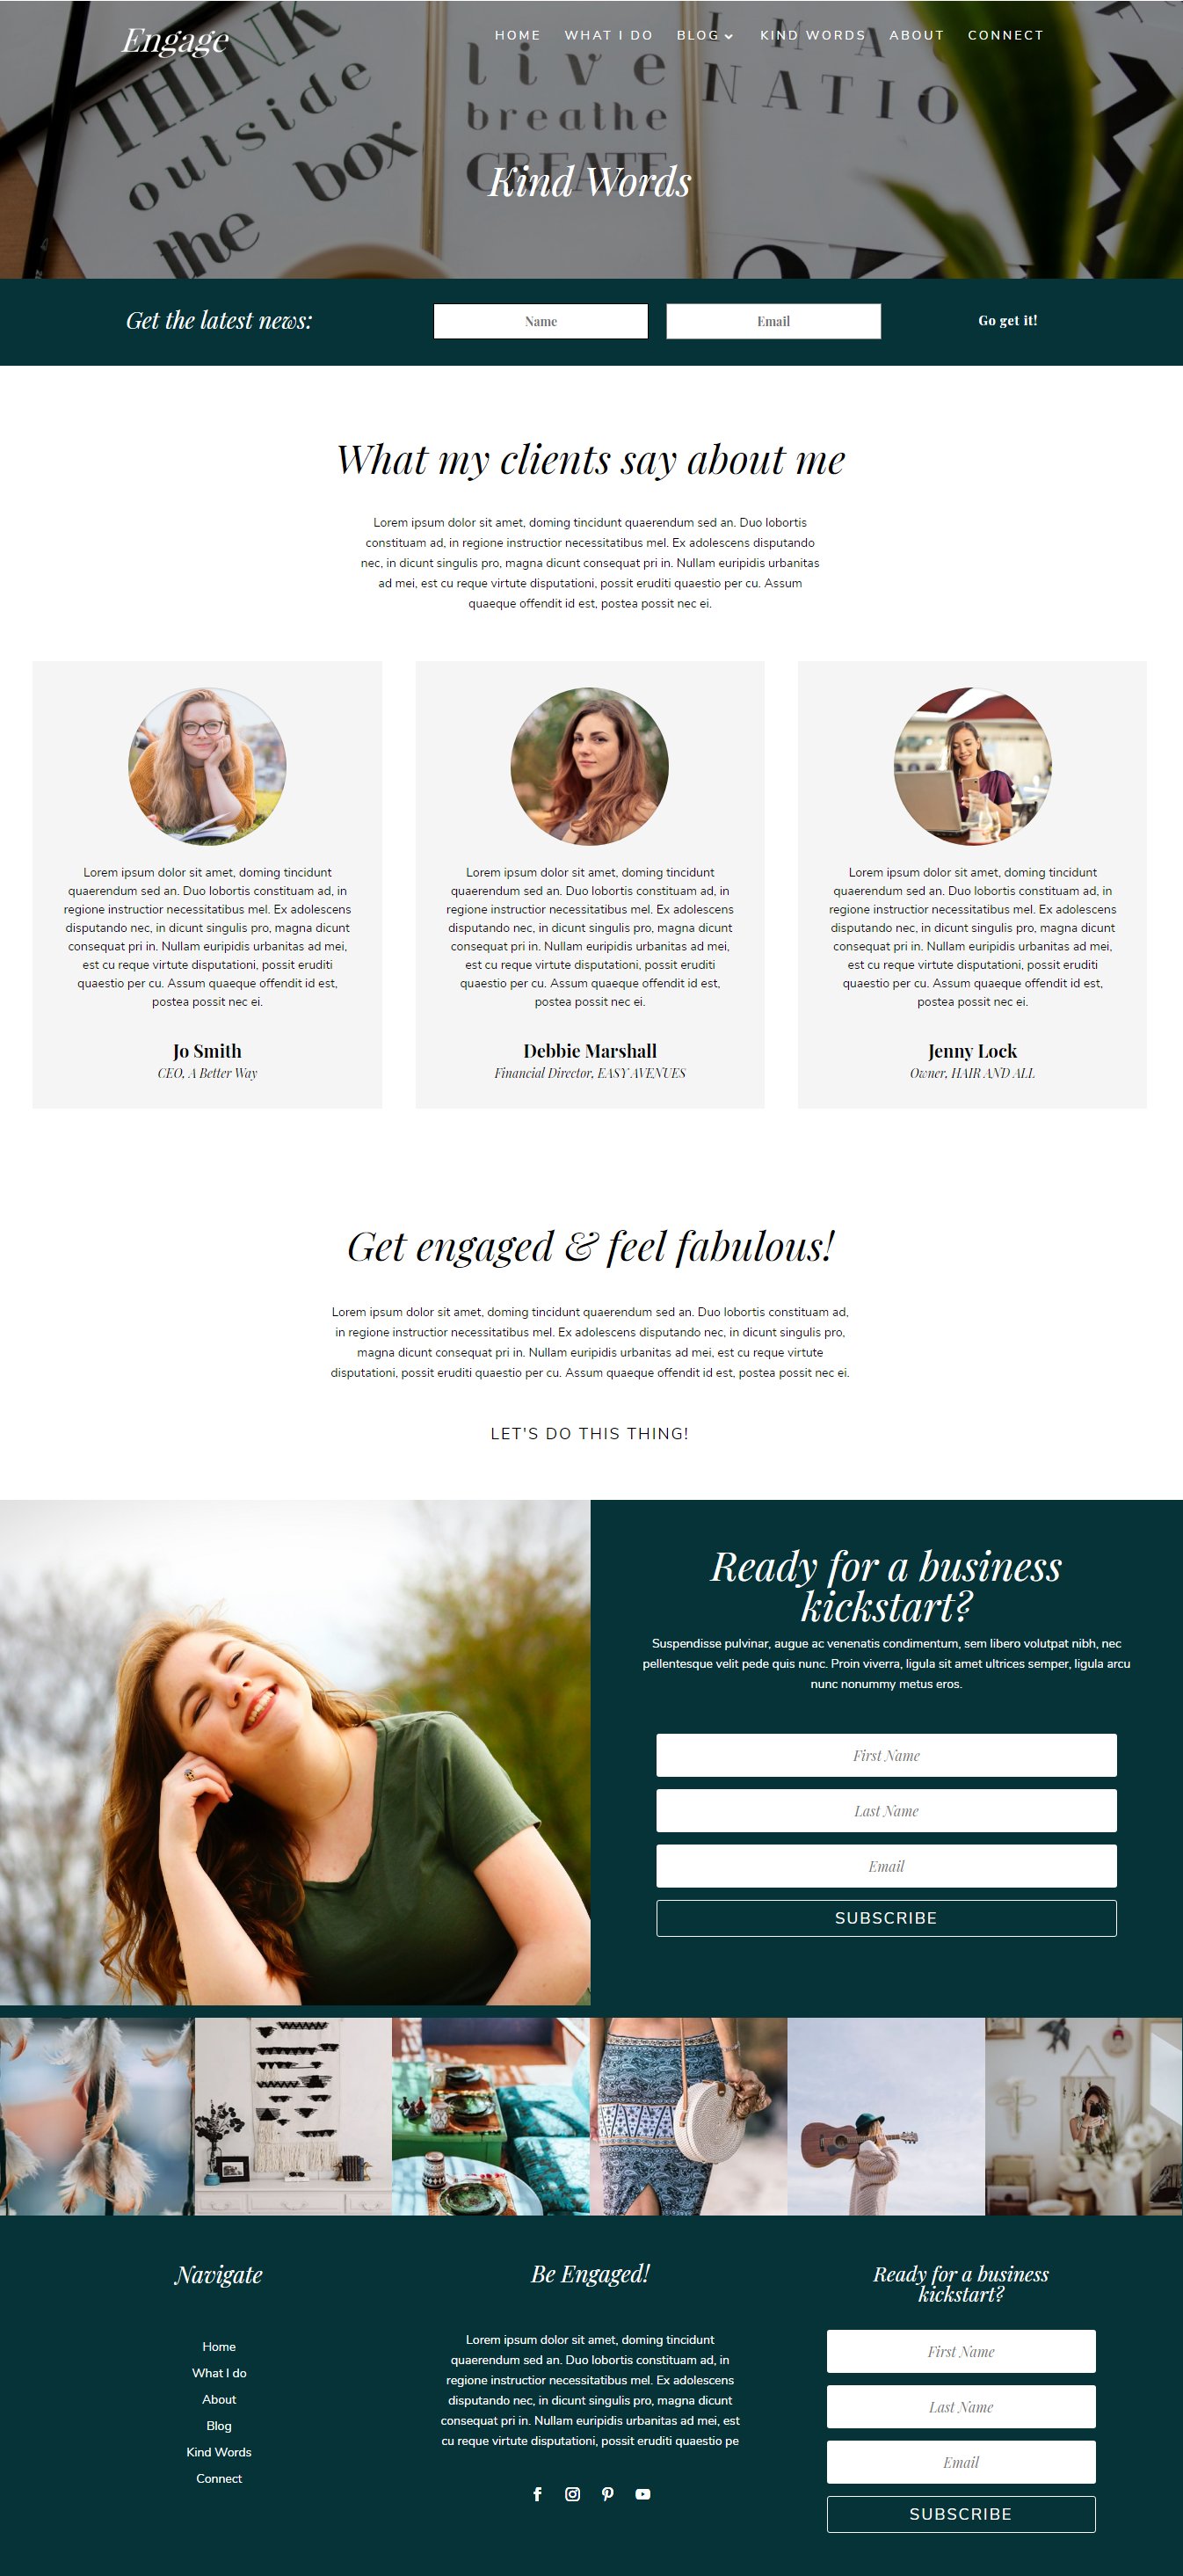 Use this WordPress template for your brand.